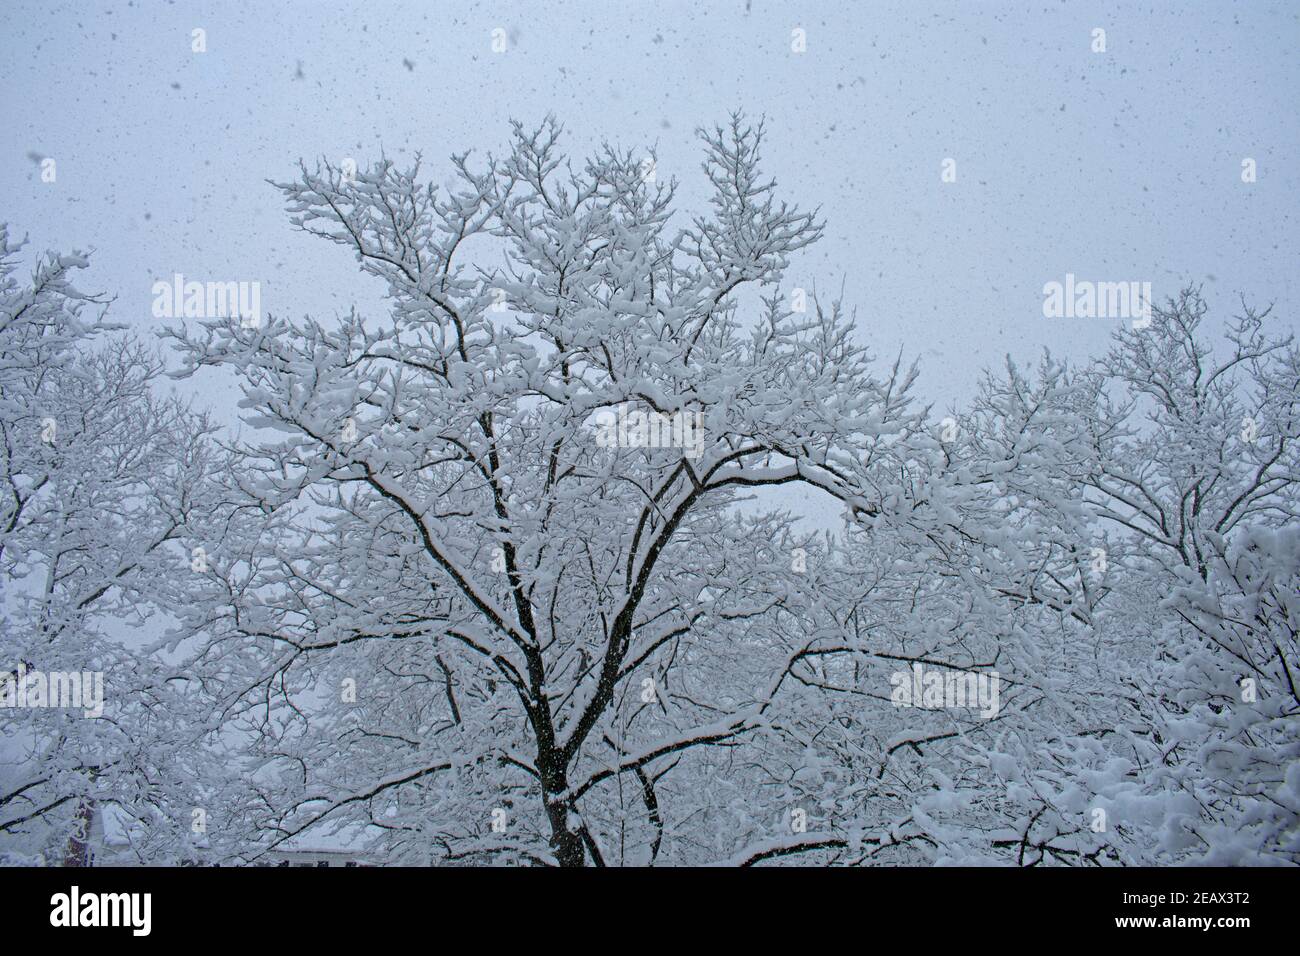 Falling snow of a mid-winter storm covers the branches of leafless sycamore trees in a suburban neighborhood -11 Stock Photo